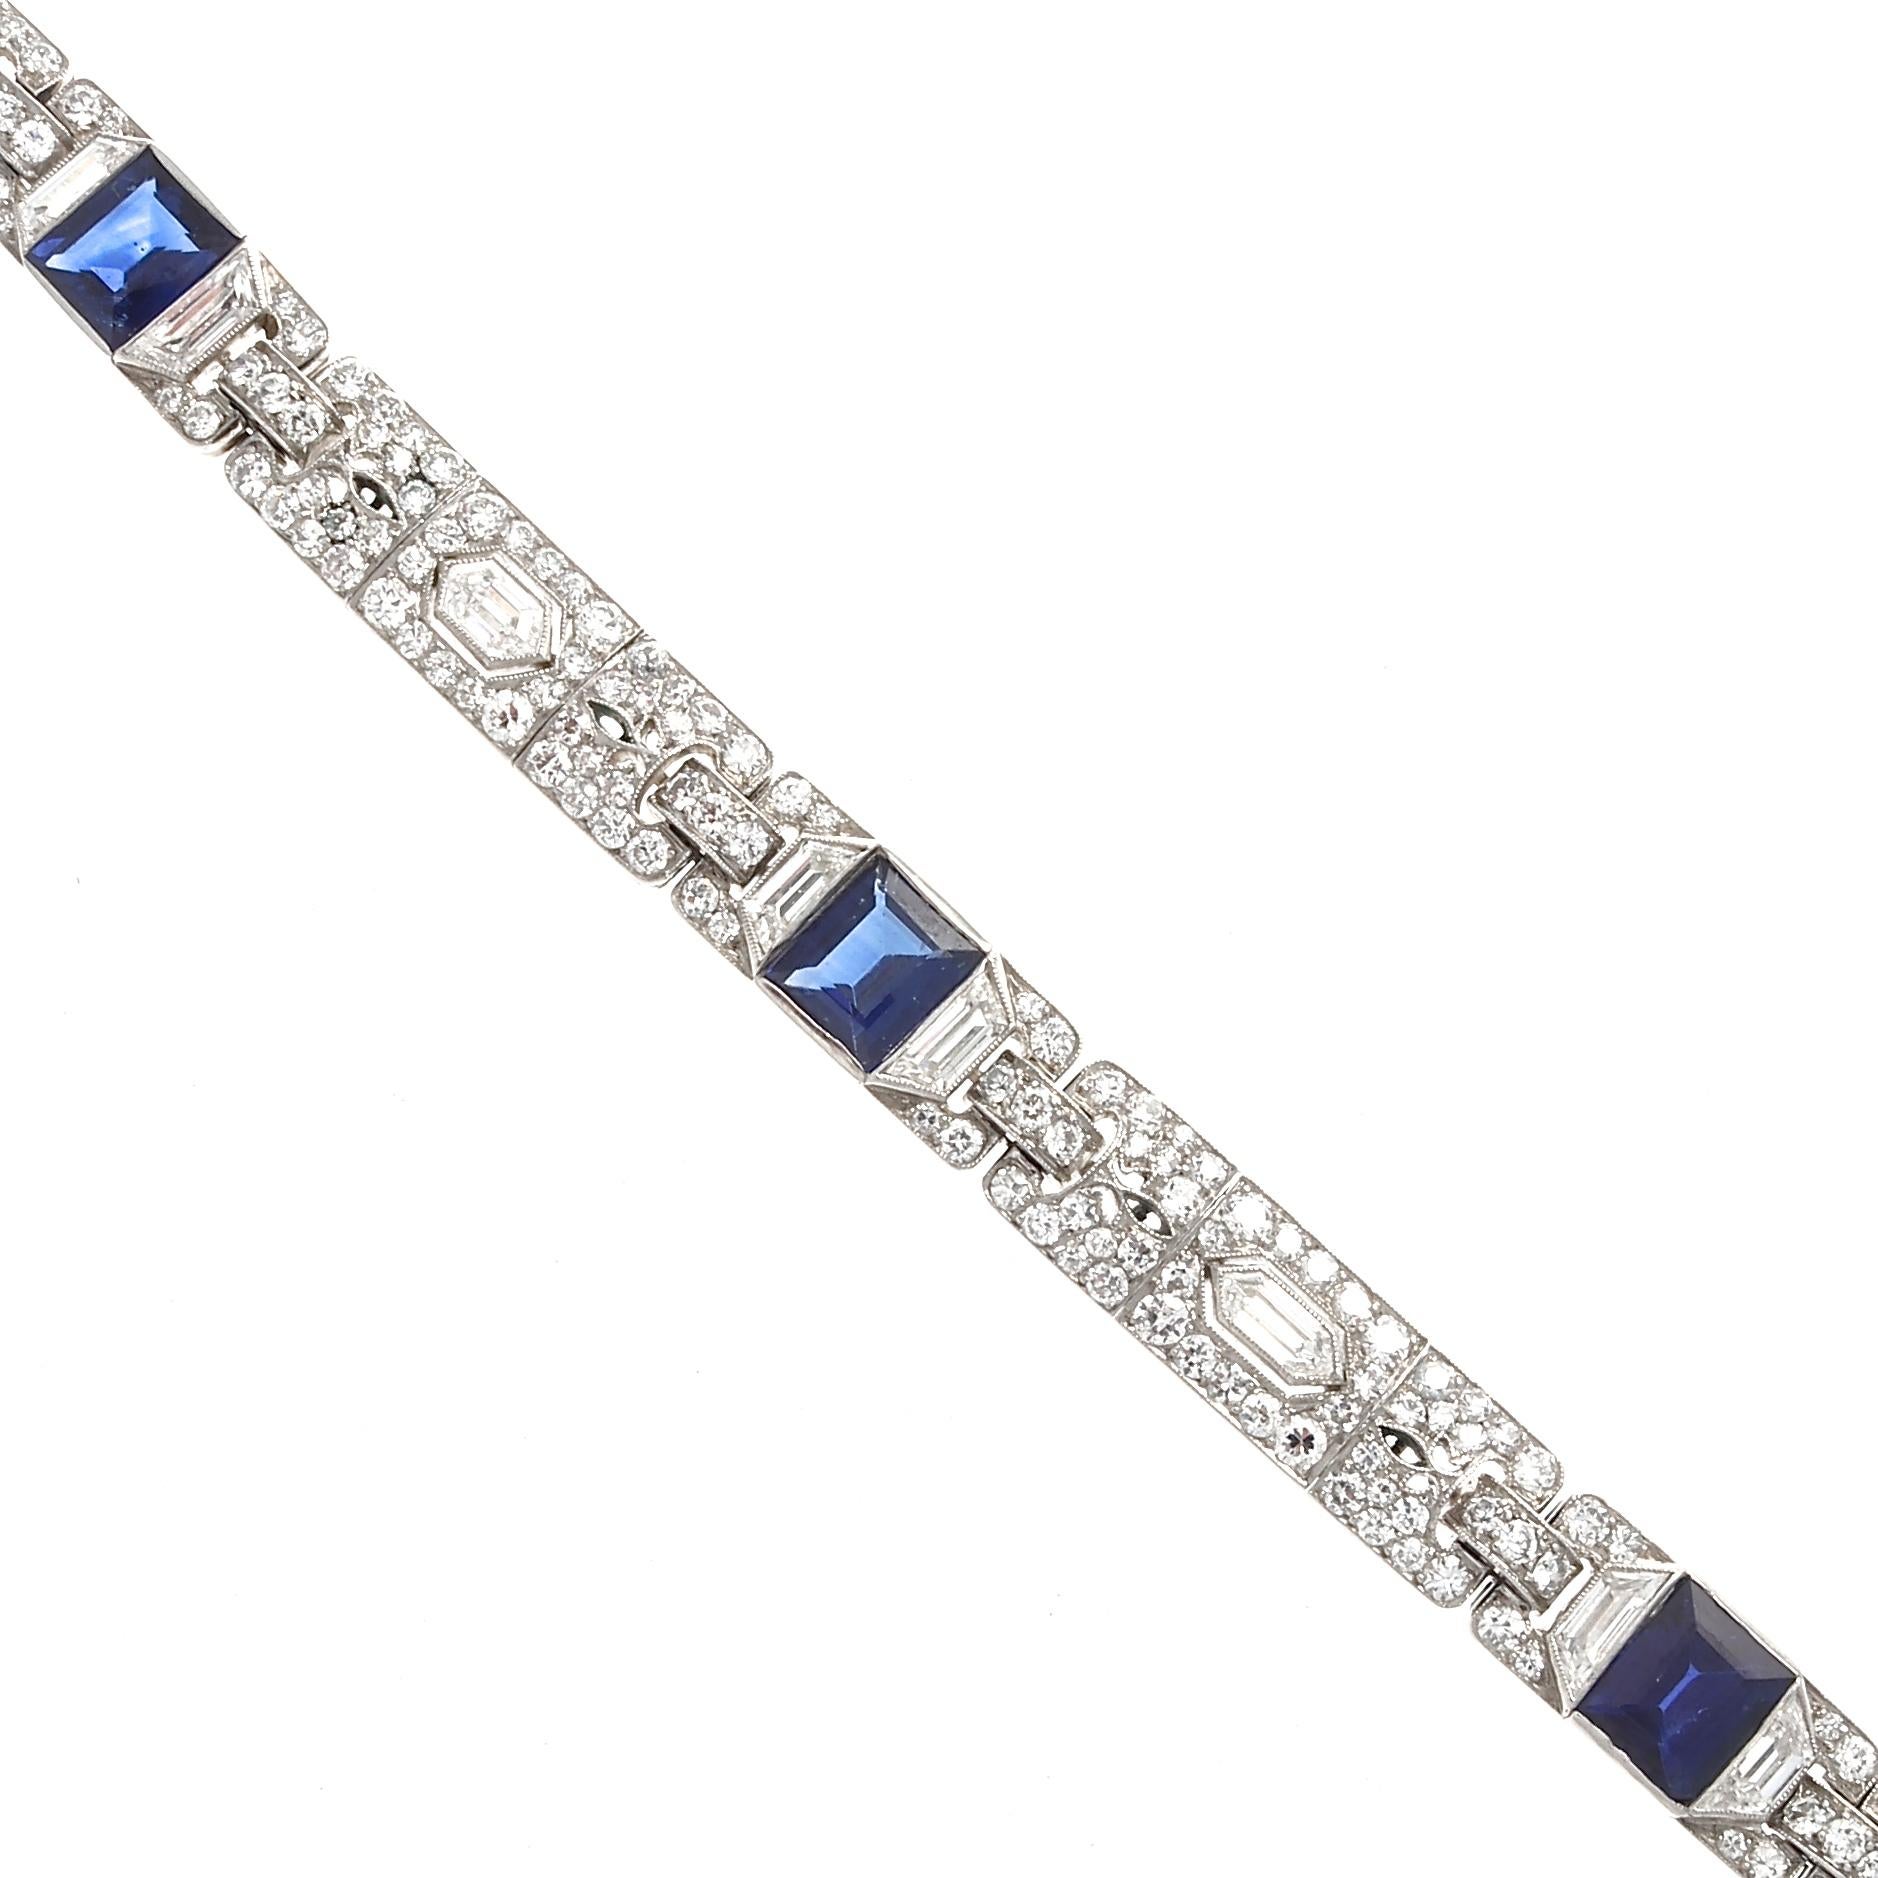 Quintessential design from the most admired jewelry house of the time. Featuring four 3.50 carat carre cut royal blue sapphires that are AGL certified as Pailin region with no indications of heat treatment. Separated by elaborate links of specialty